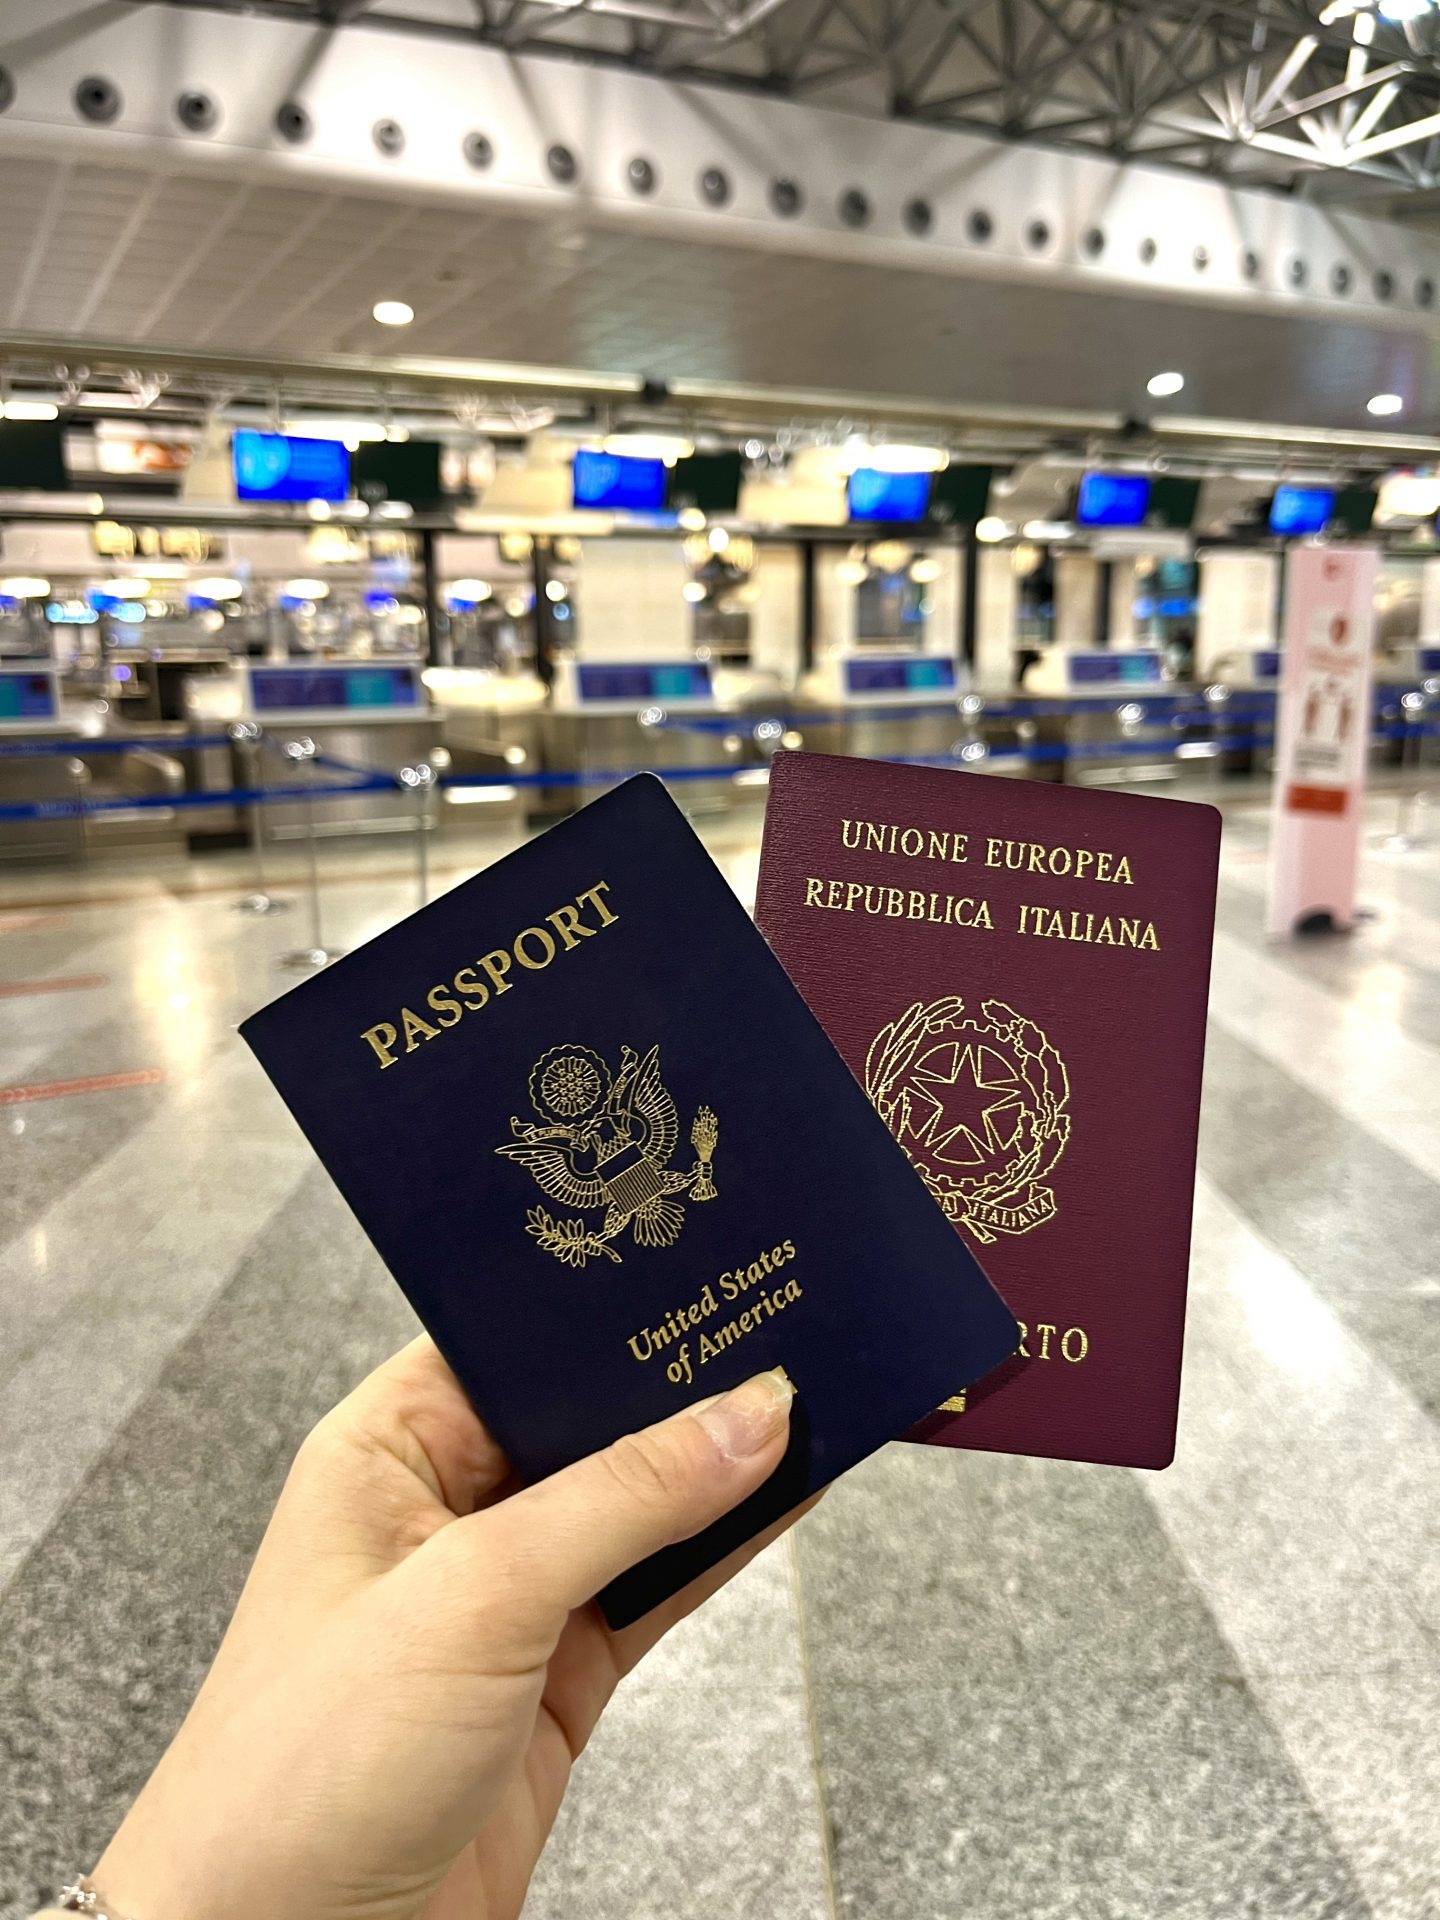 travelling with two passports with different names